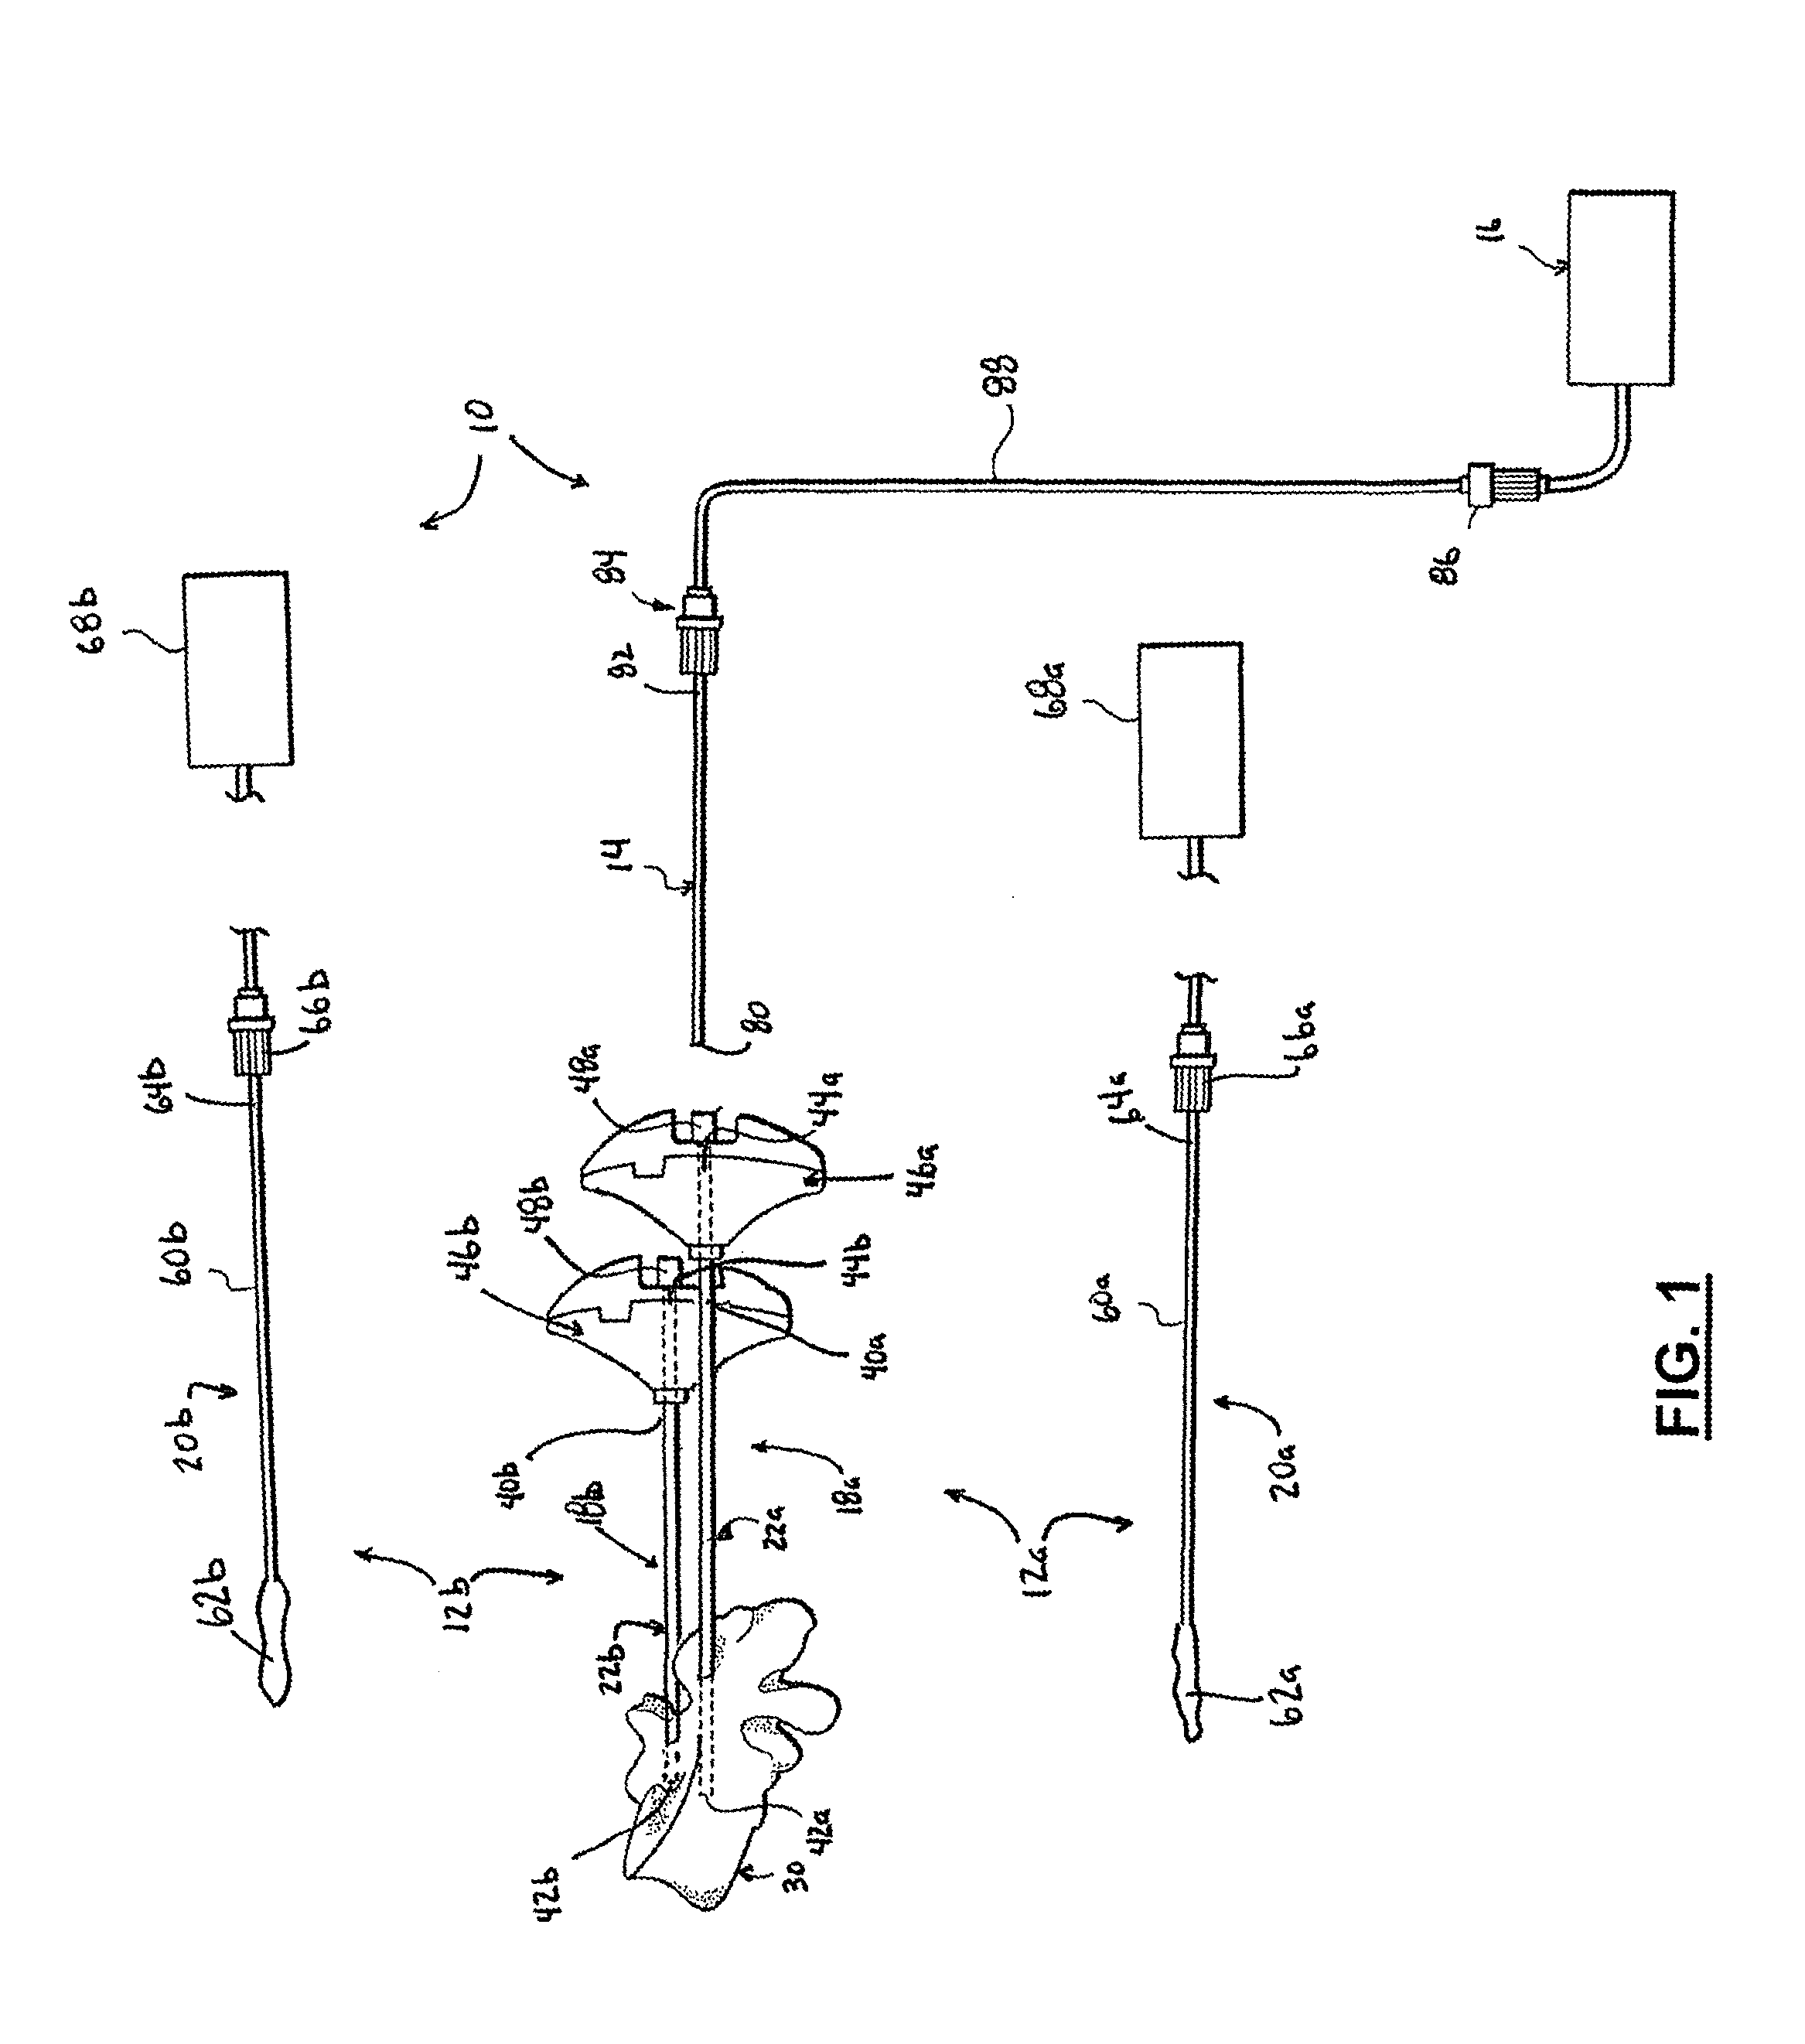 Apparatus and method for stylet-guided vertebral augmentation